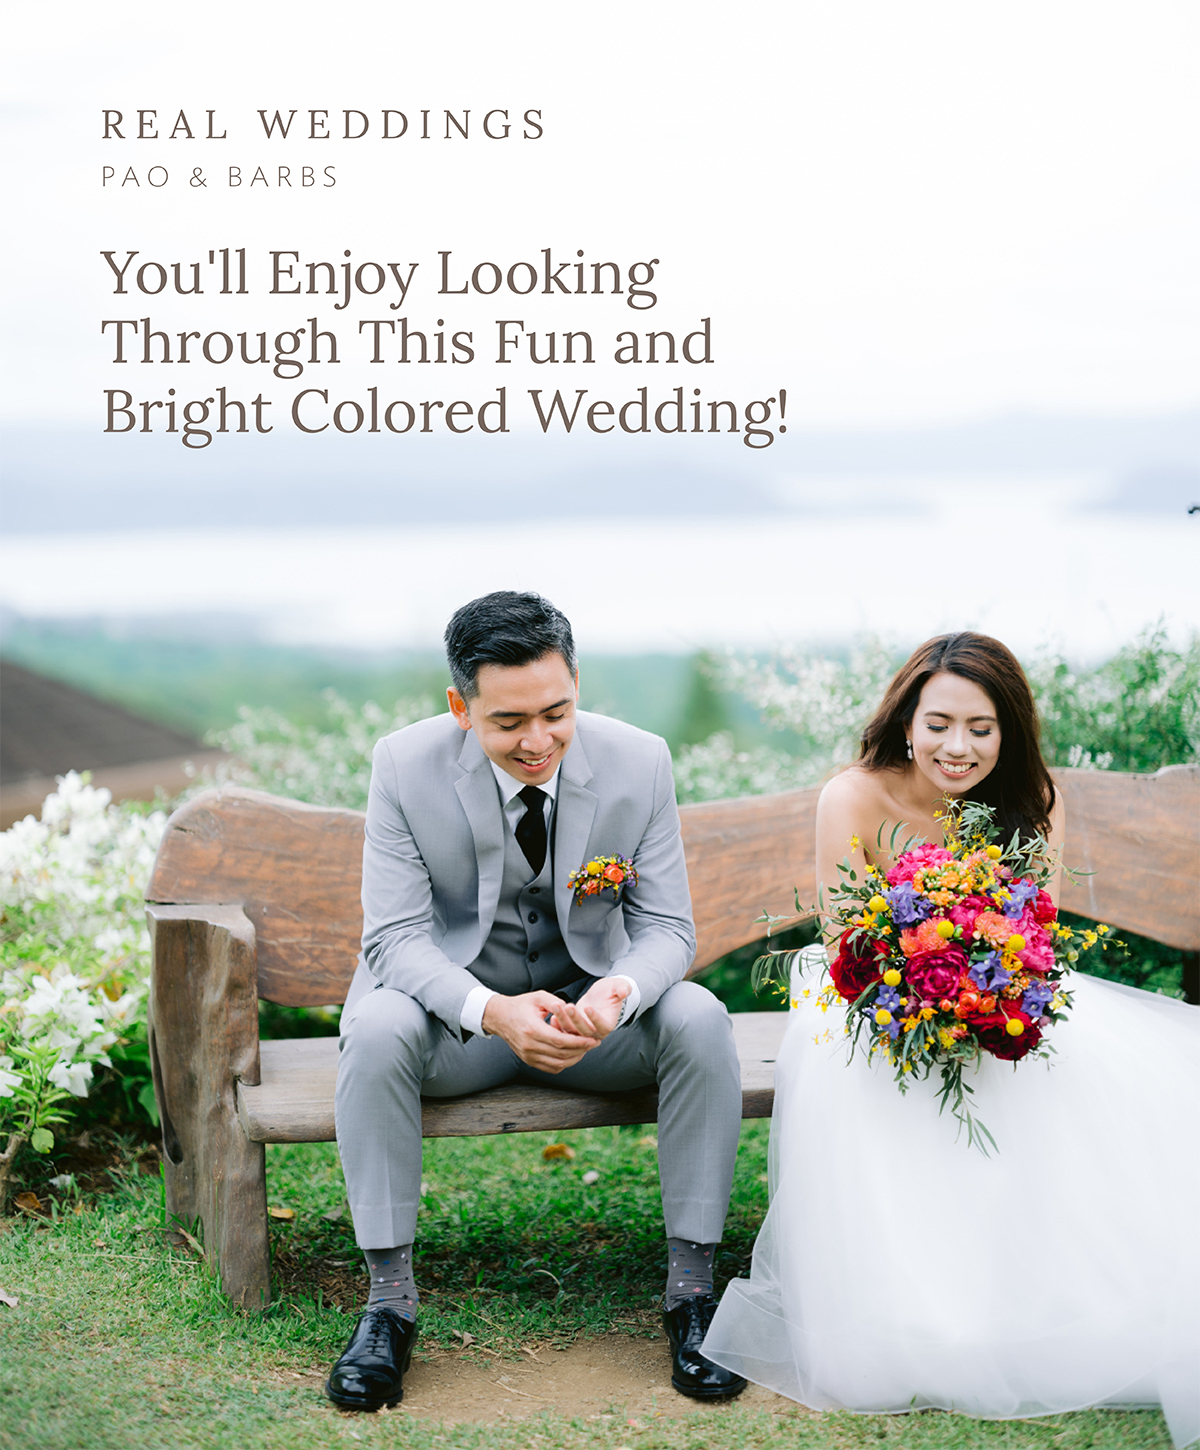 You'll Enjoy Looking Through This Fun and Bright Colored Wedding!